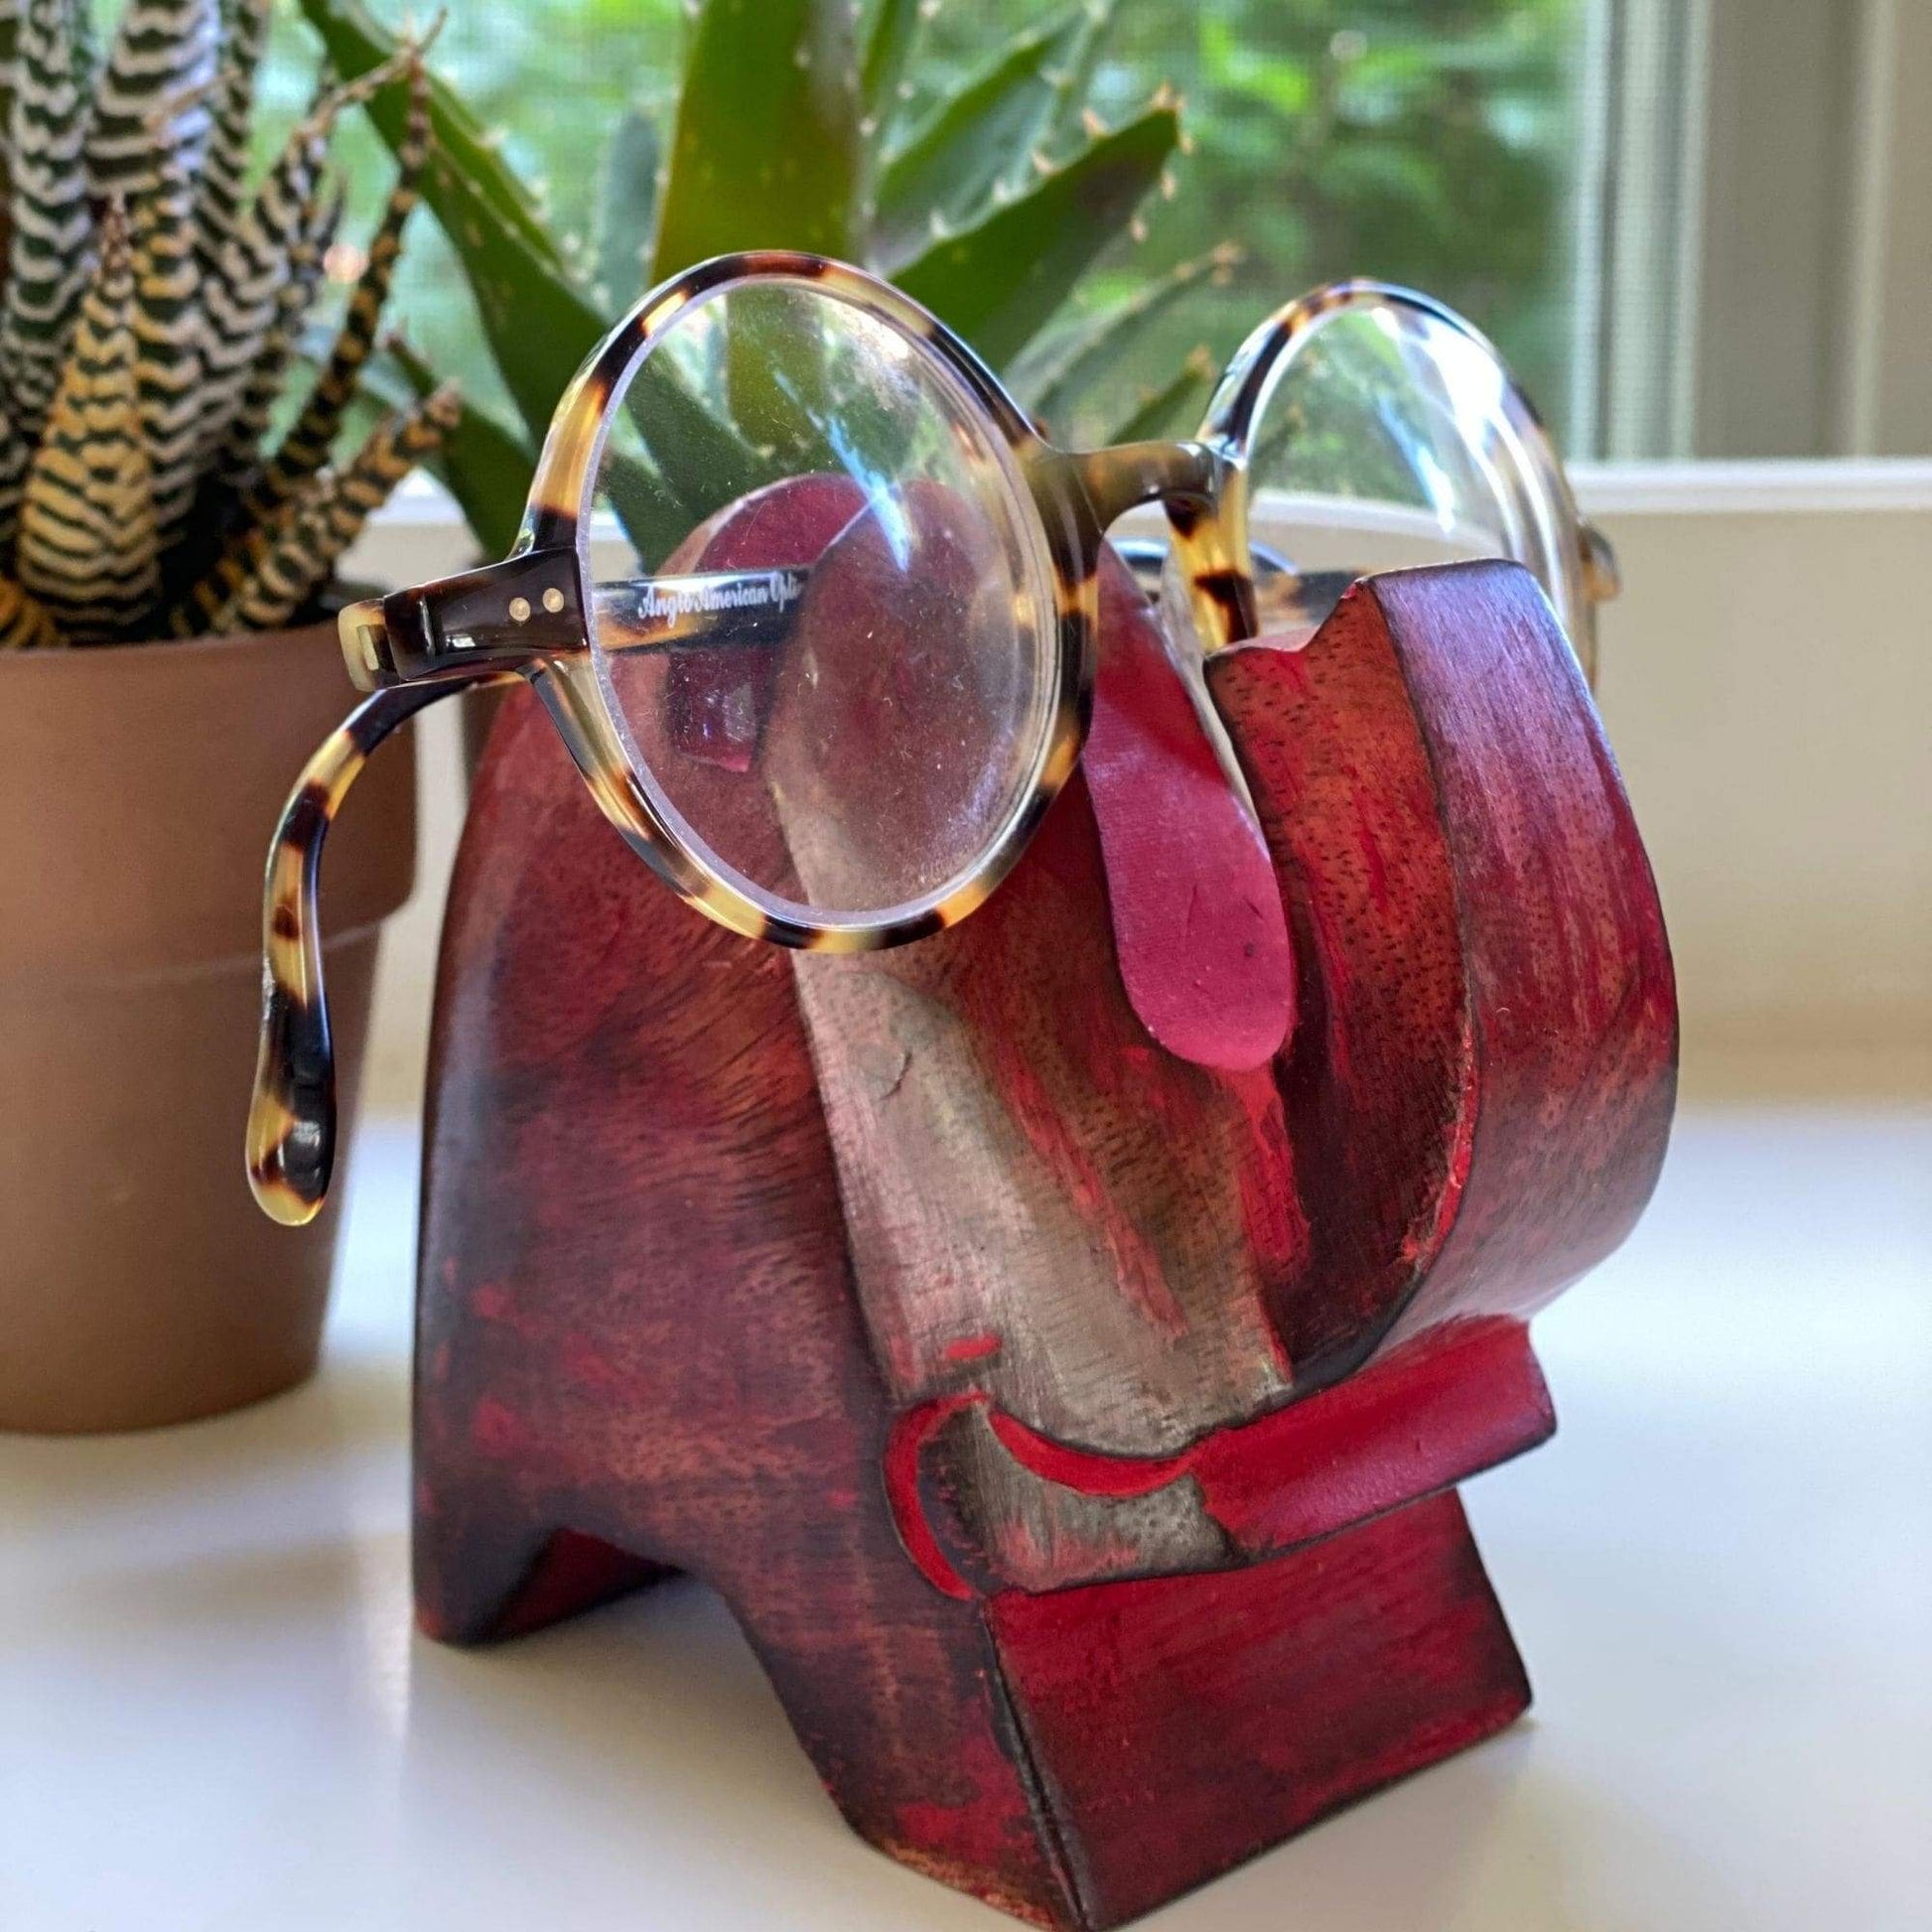 Elephant Eyeglass Stand in Red Wash - Linda Kay Gifford’s - Those Nasty Women TALK! by SWEETSurvivor